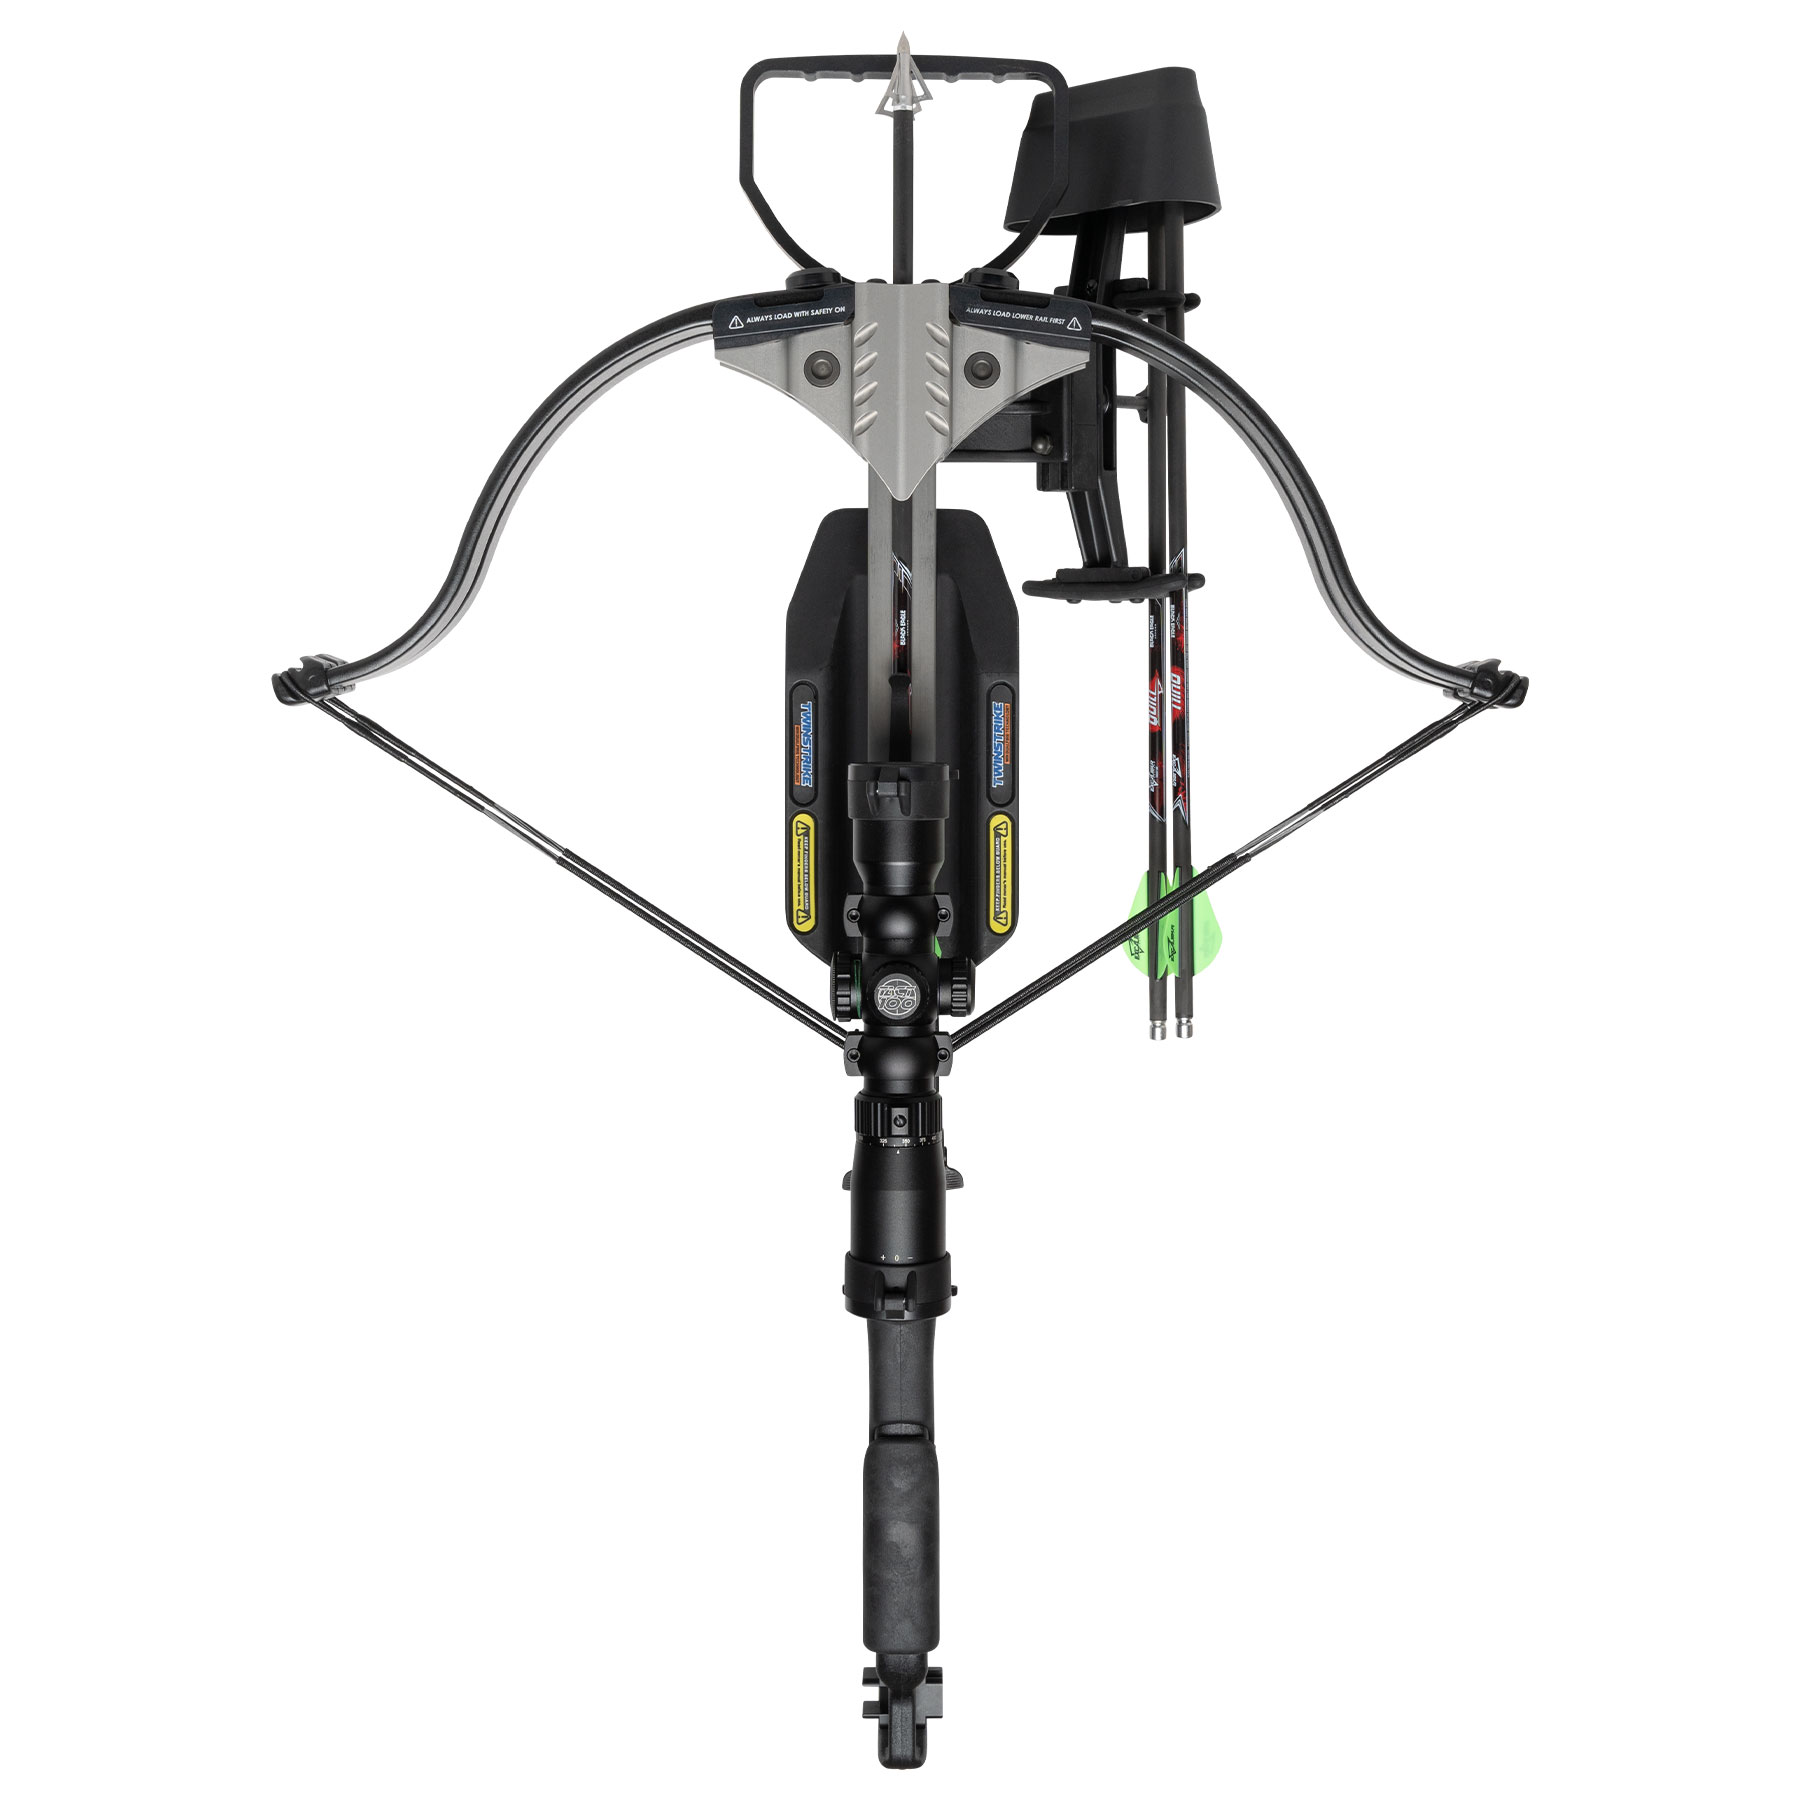 Excalibur TwinStrike Tac2 Crossbow Package Black - Oz Hunting & Bows